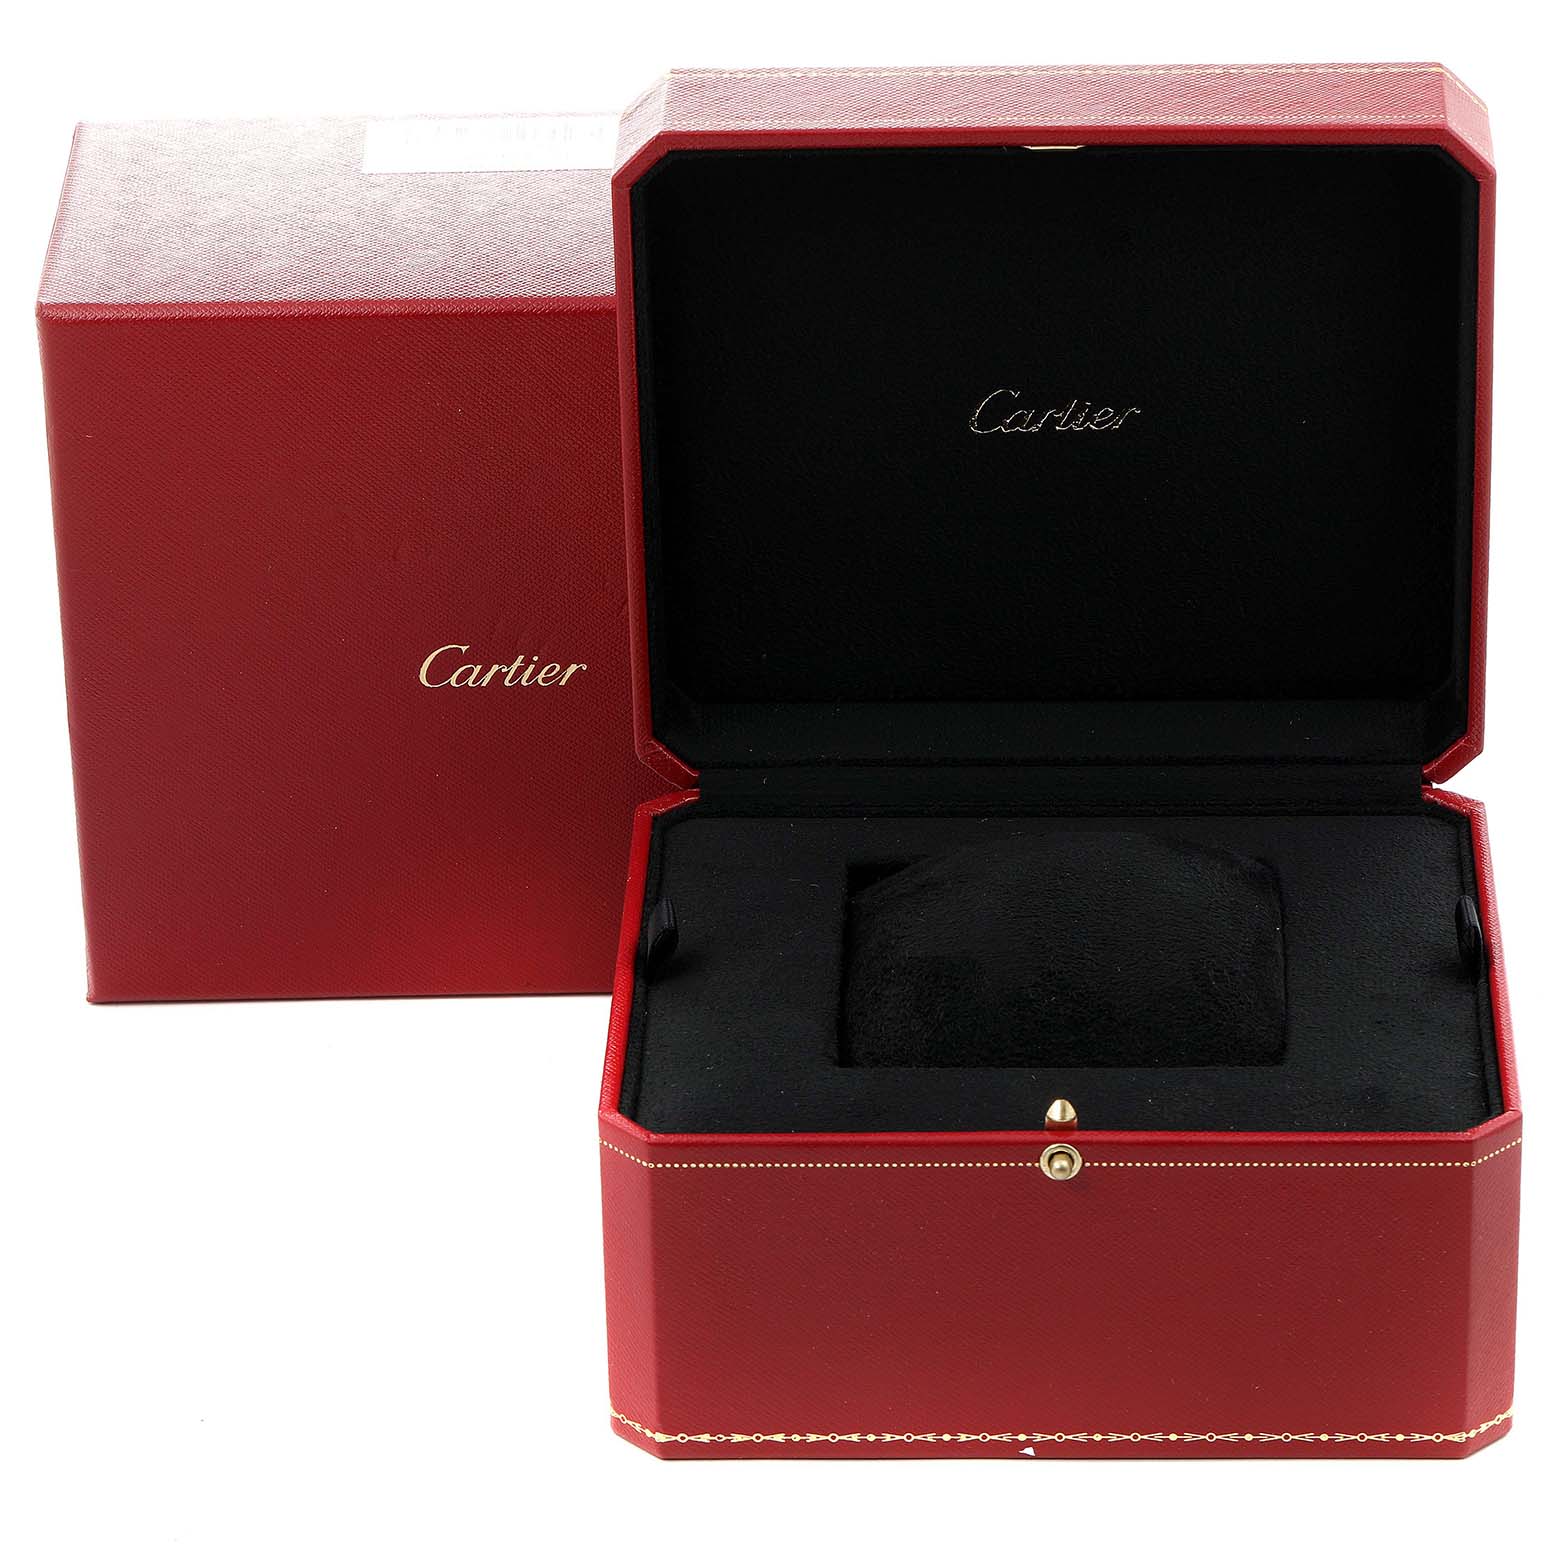 cartier box for watch